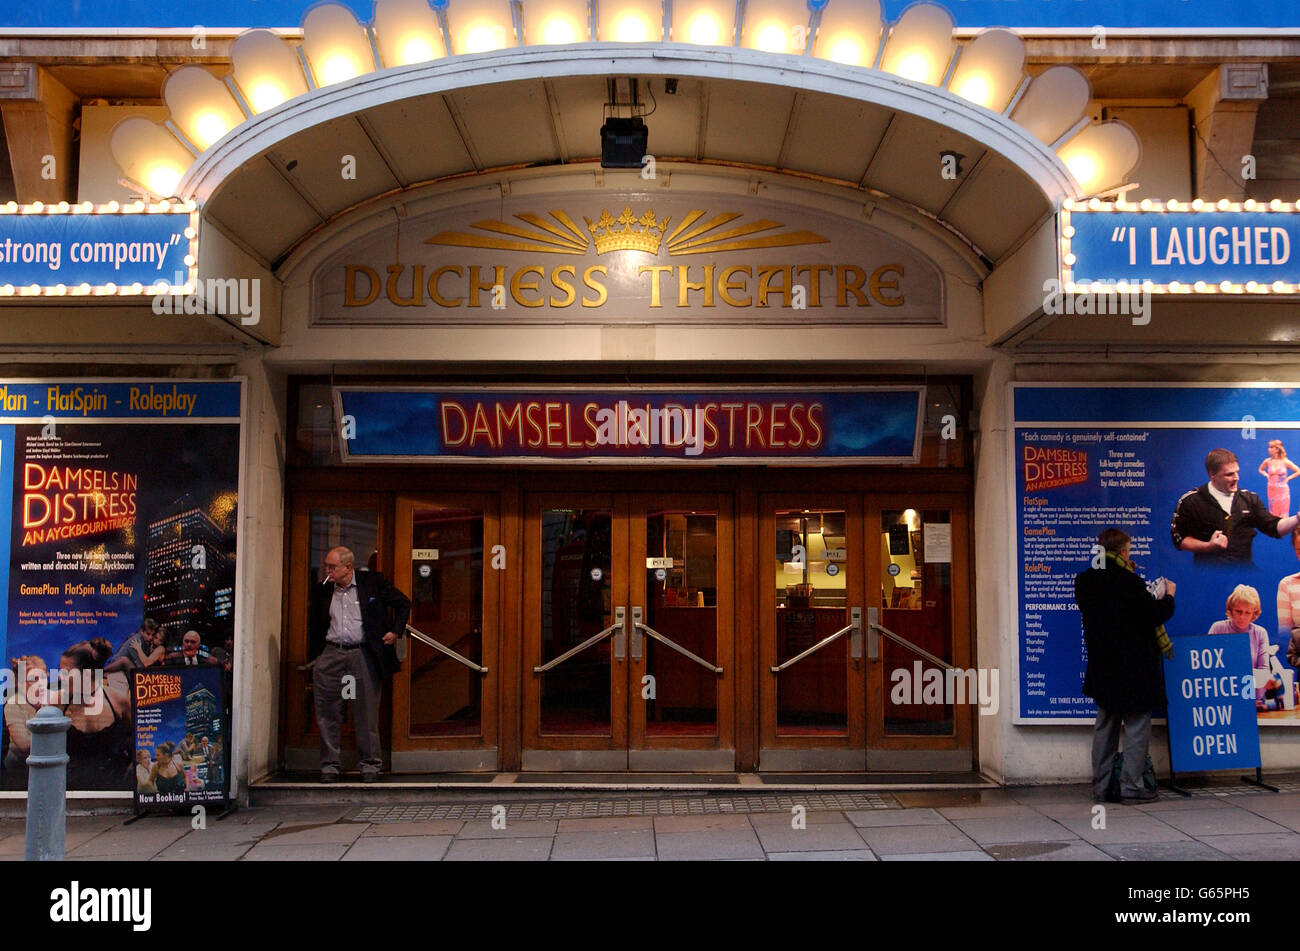 The Duchess Theatre in Catherine Street, London showing Damsels in Distress an Alan Ayckbourn Trilogy of plays. Stock Photo